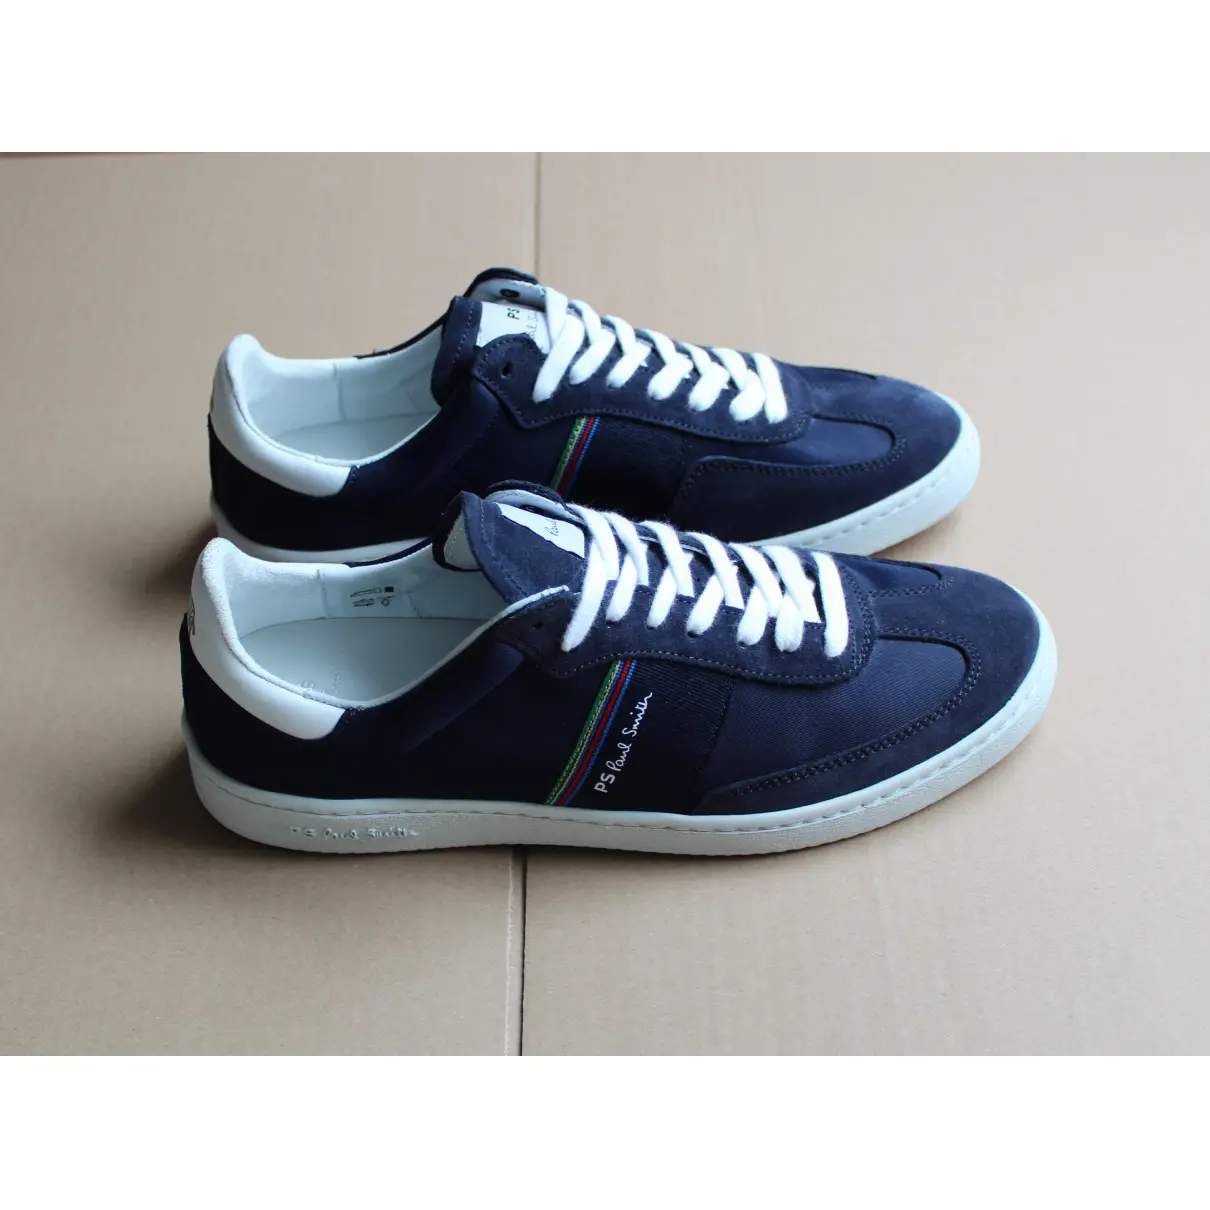 Buy Paul Smith Low trainers online